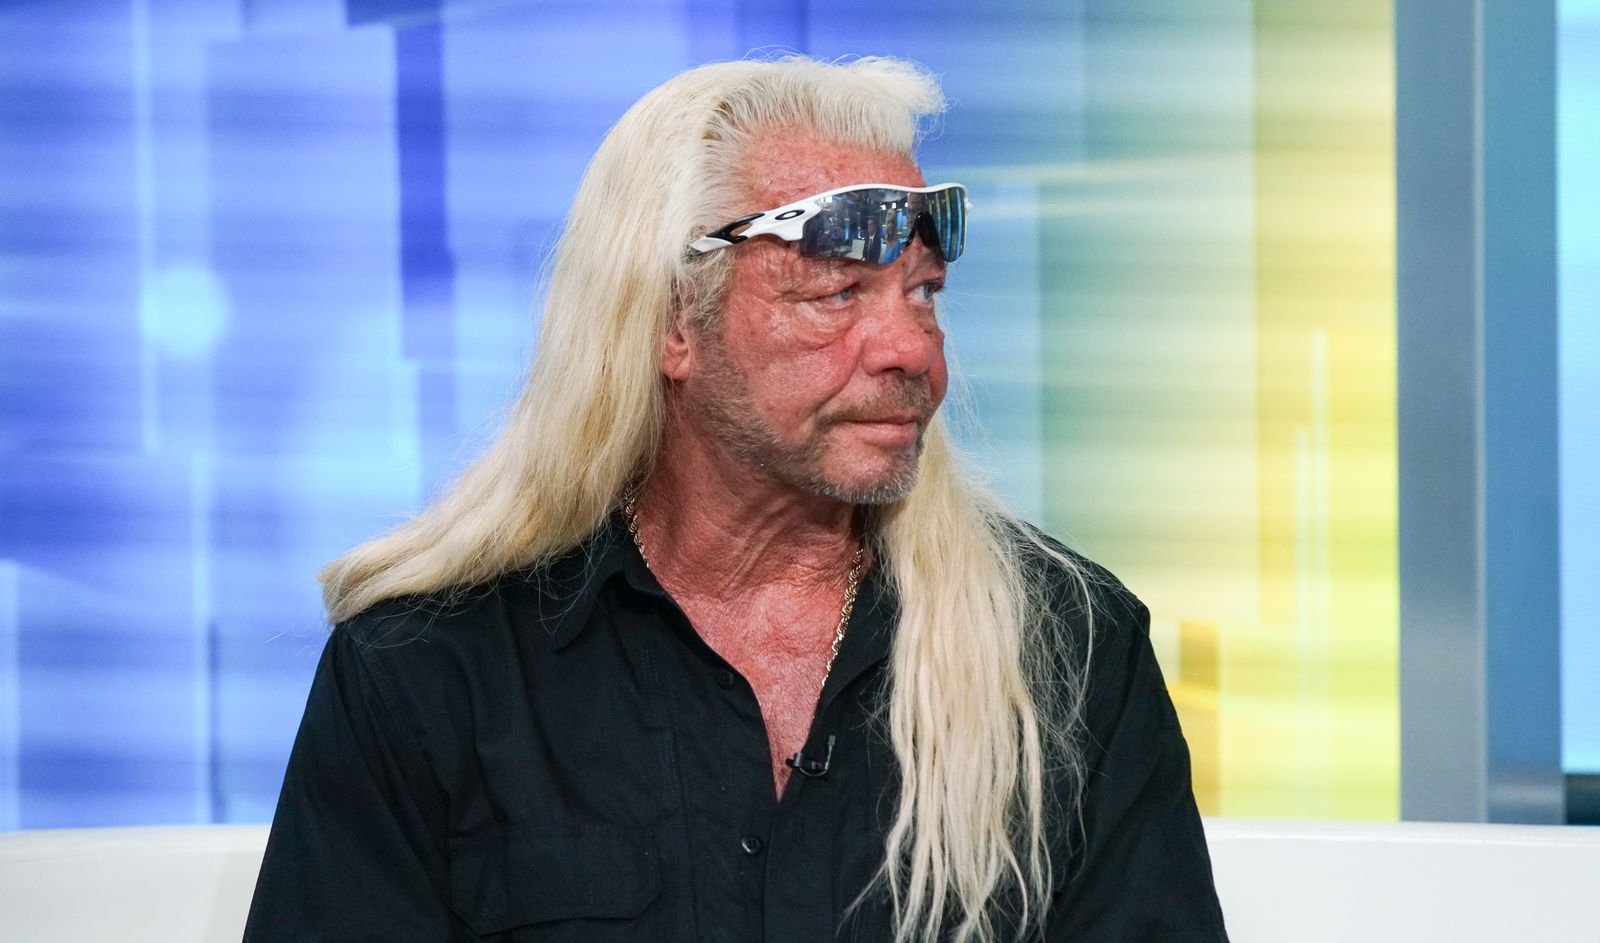 Duane Chapman visits "FOX & Friends" at FOX Studios on August 28, 2019, in New York City | Photo: Bennett Raglin/Getty Images